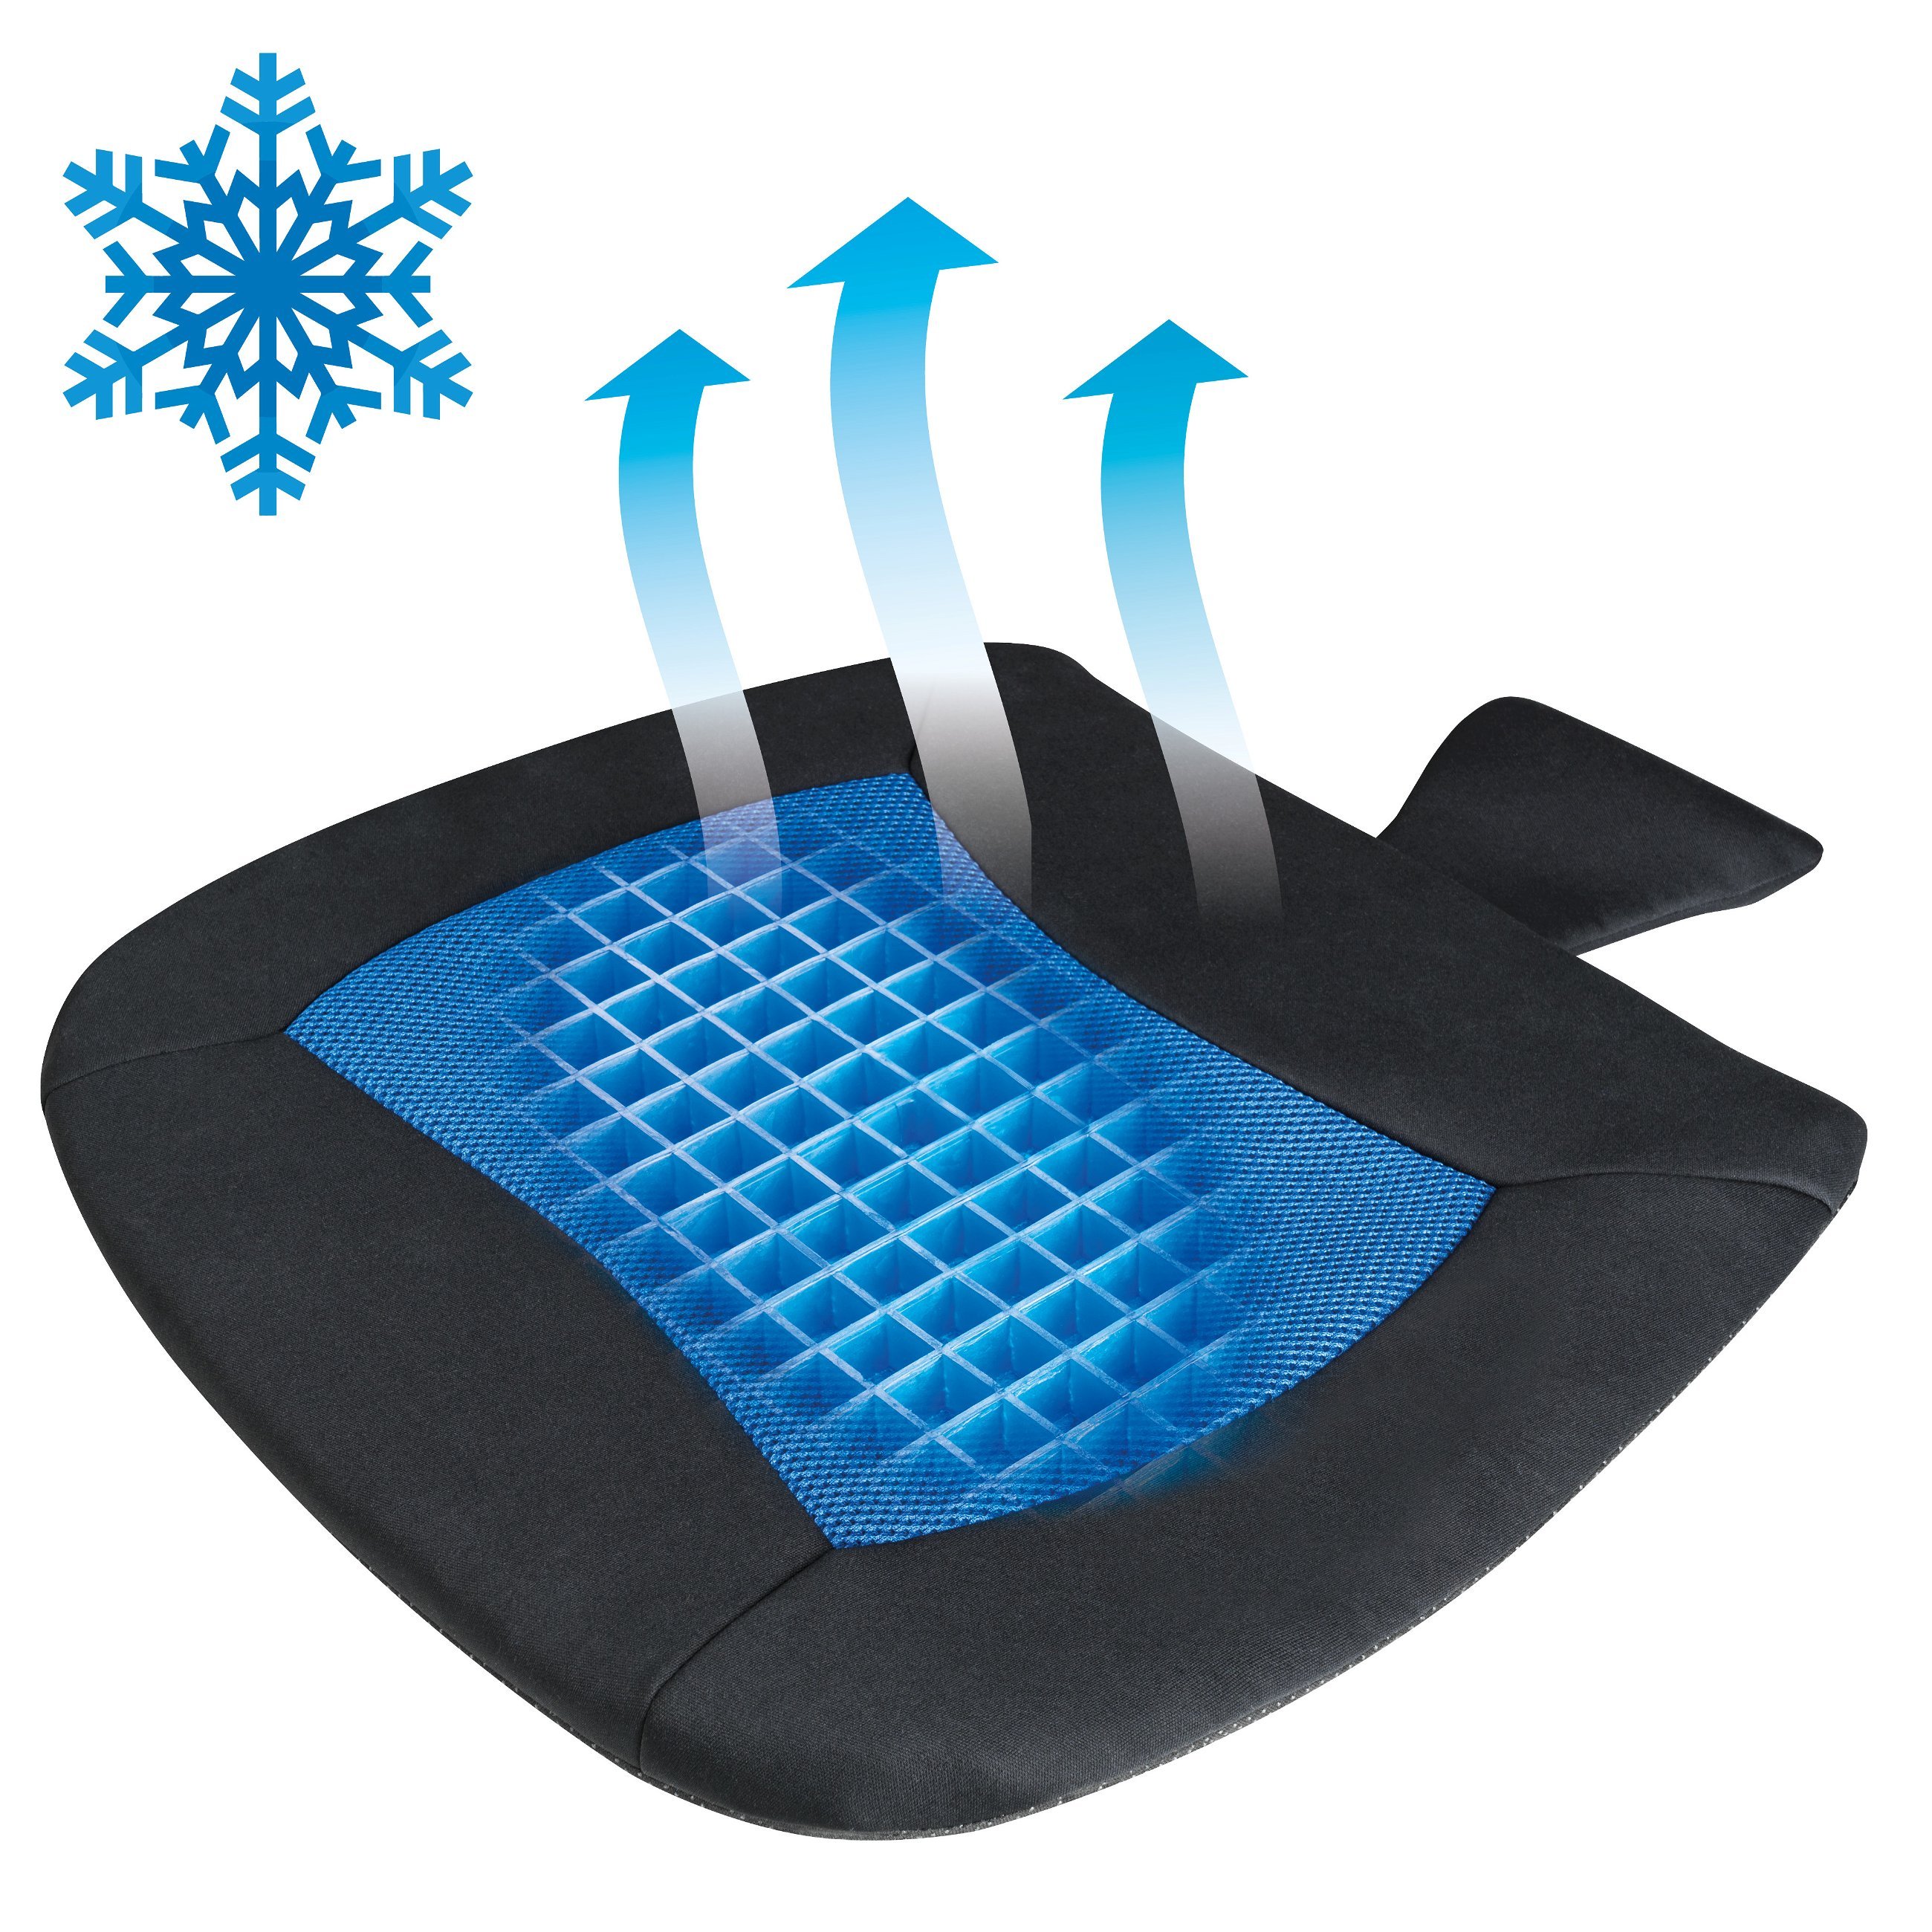 Seat cushion Cool Touch black-blue